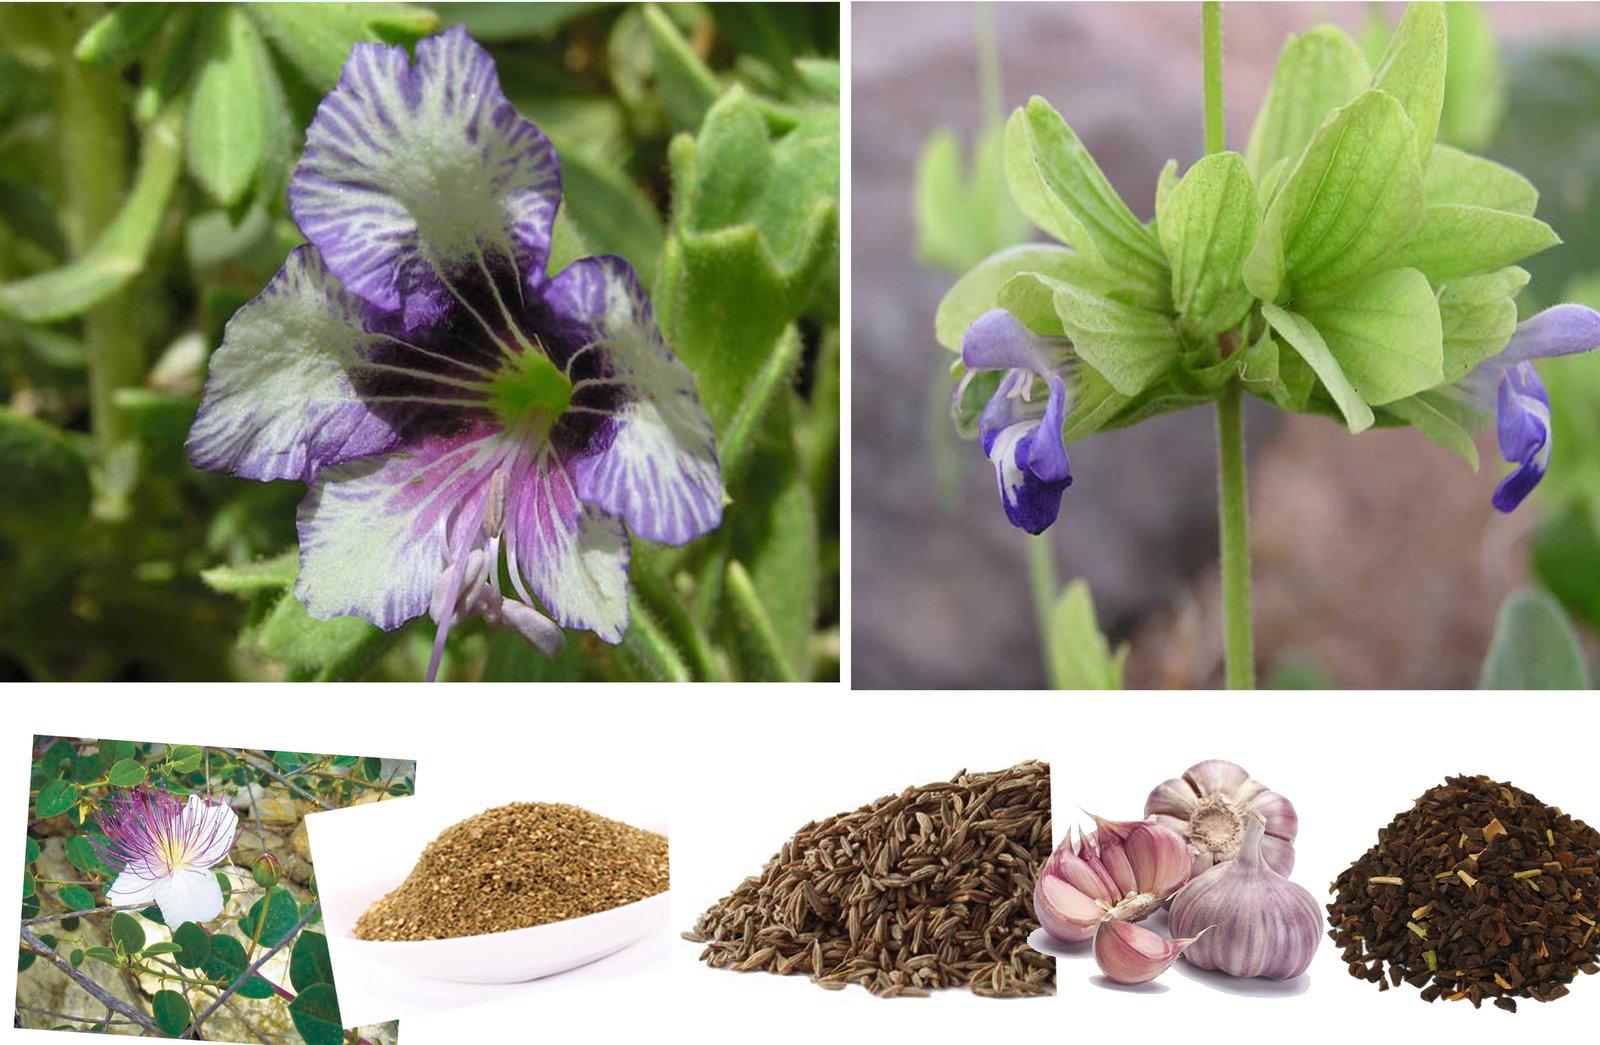 Stories about the medicinal herbs of Sinai and Bedouin medicine